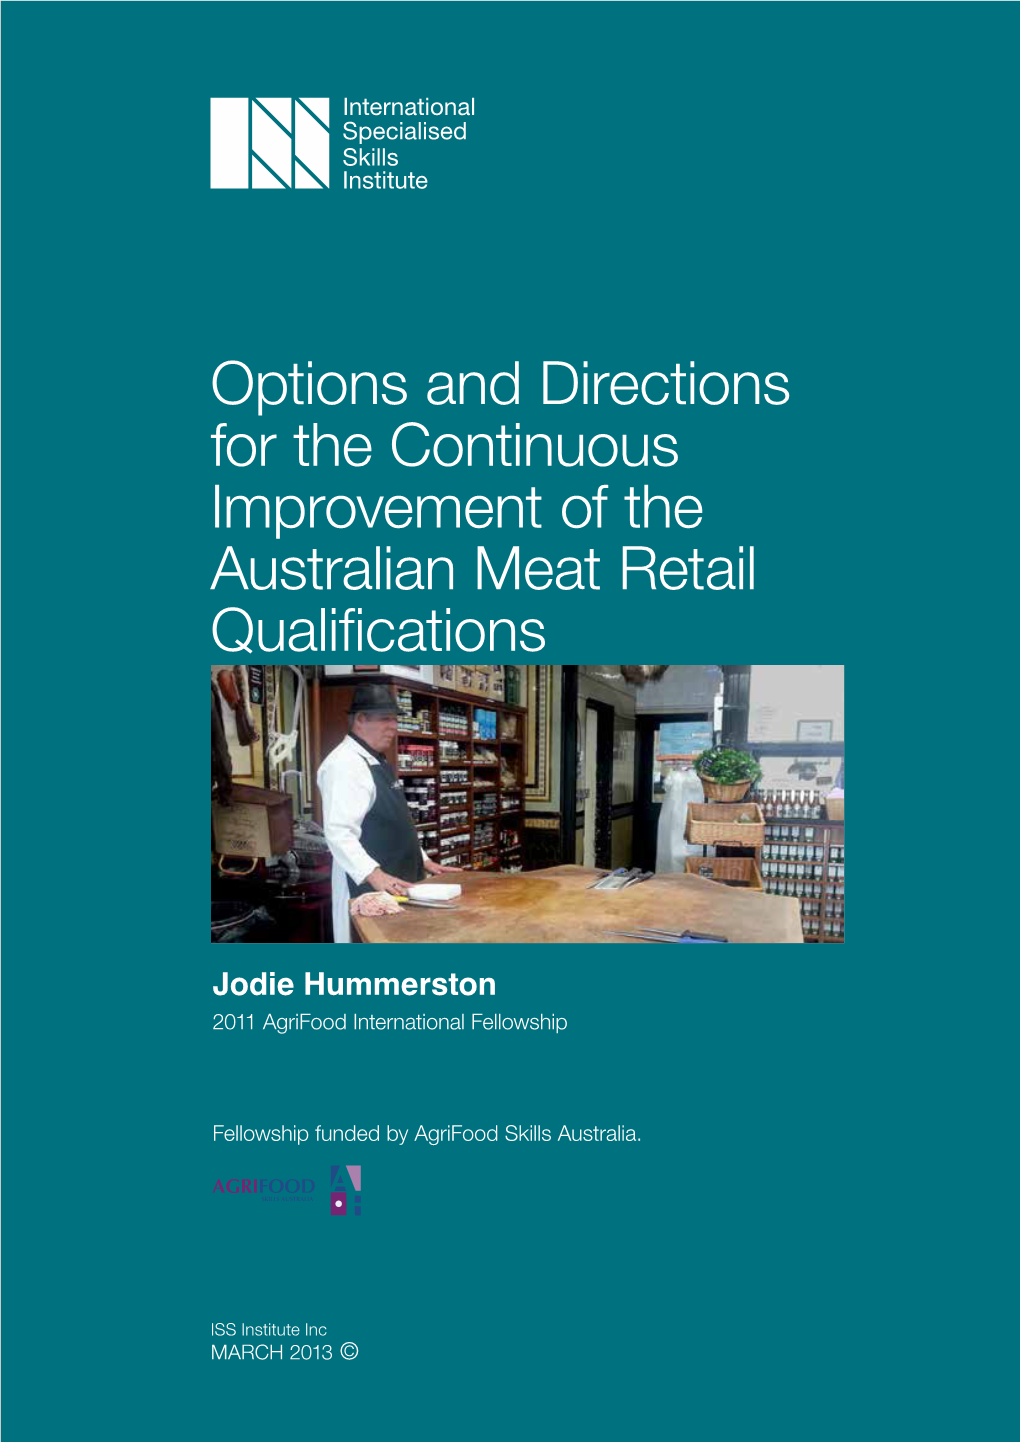 Options and Directions for the Continuous Improvement of the Australian Meat Retail Qualifications